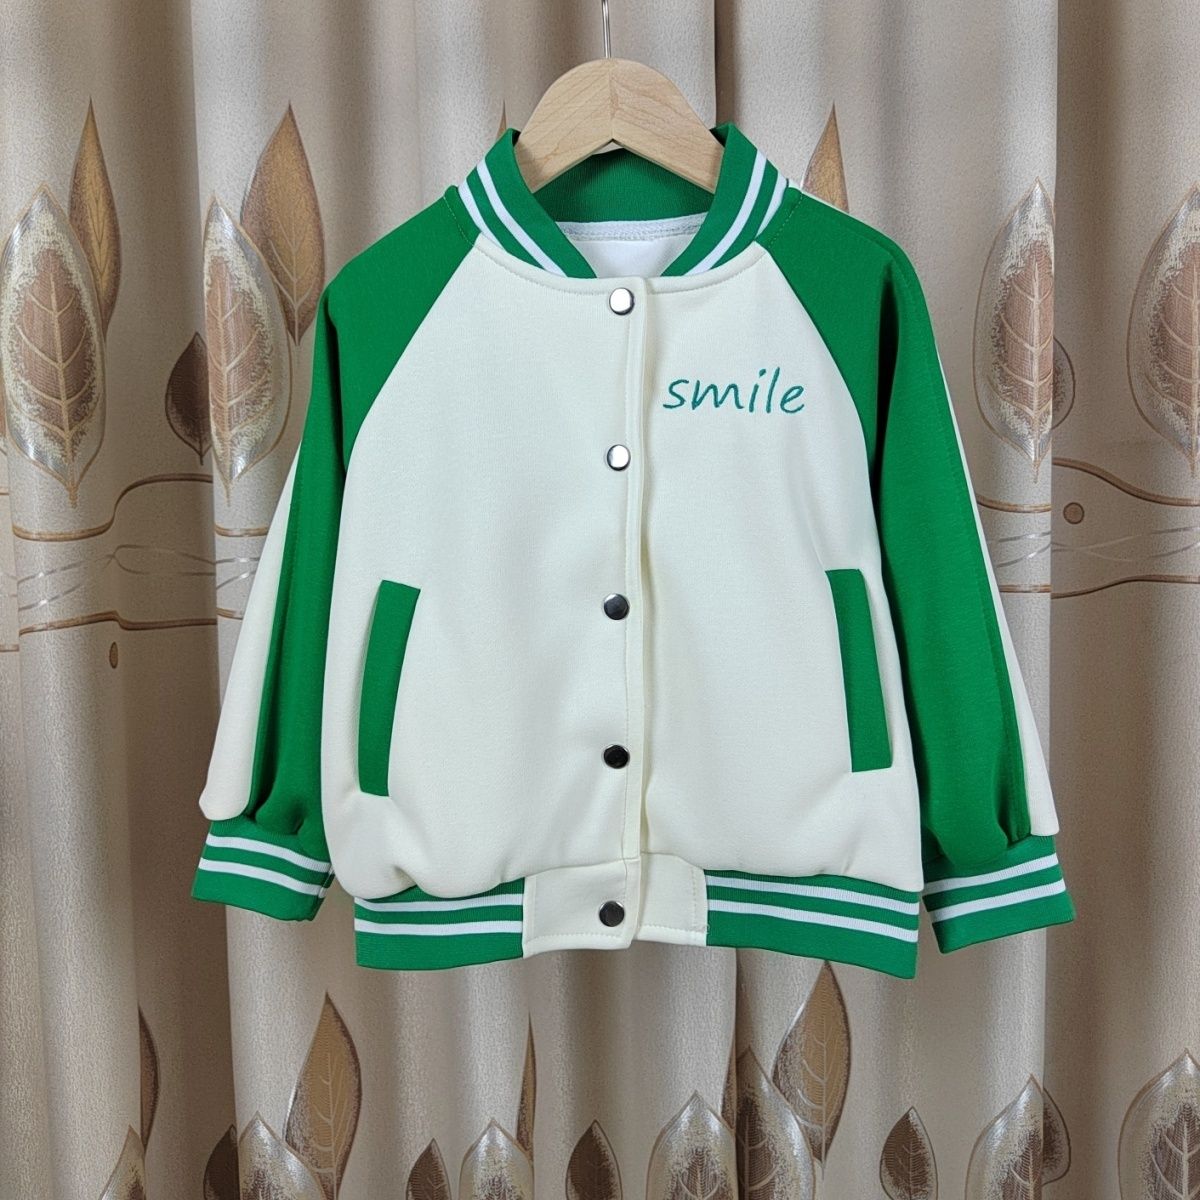 Boys and girls' jacket thickened children's baseball uniform autumn and winter clothing  new handsome middle and big children's casual winter top